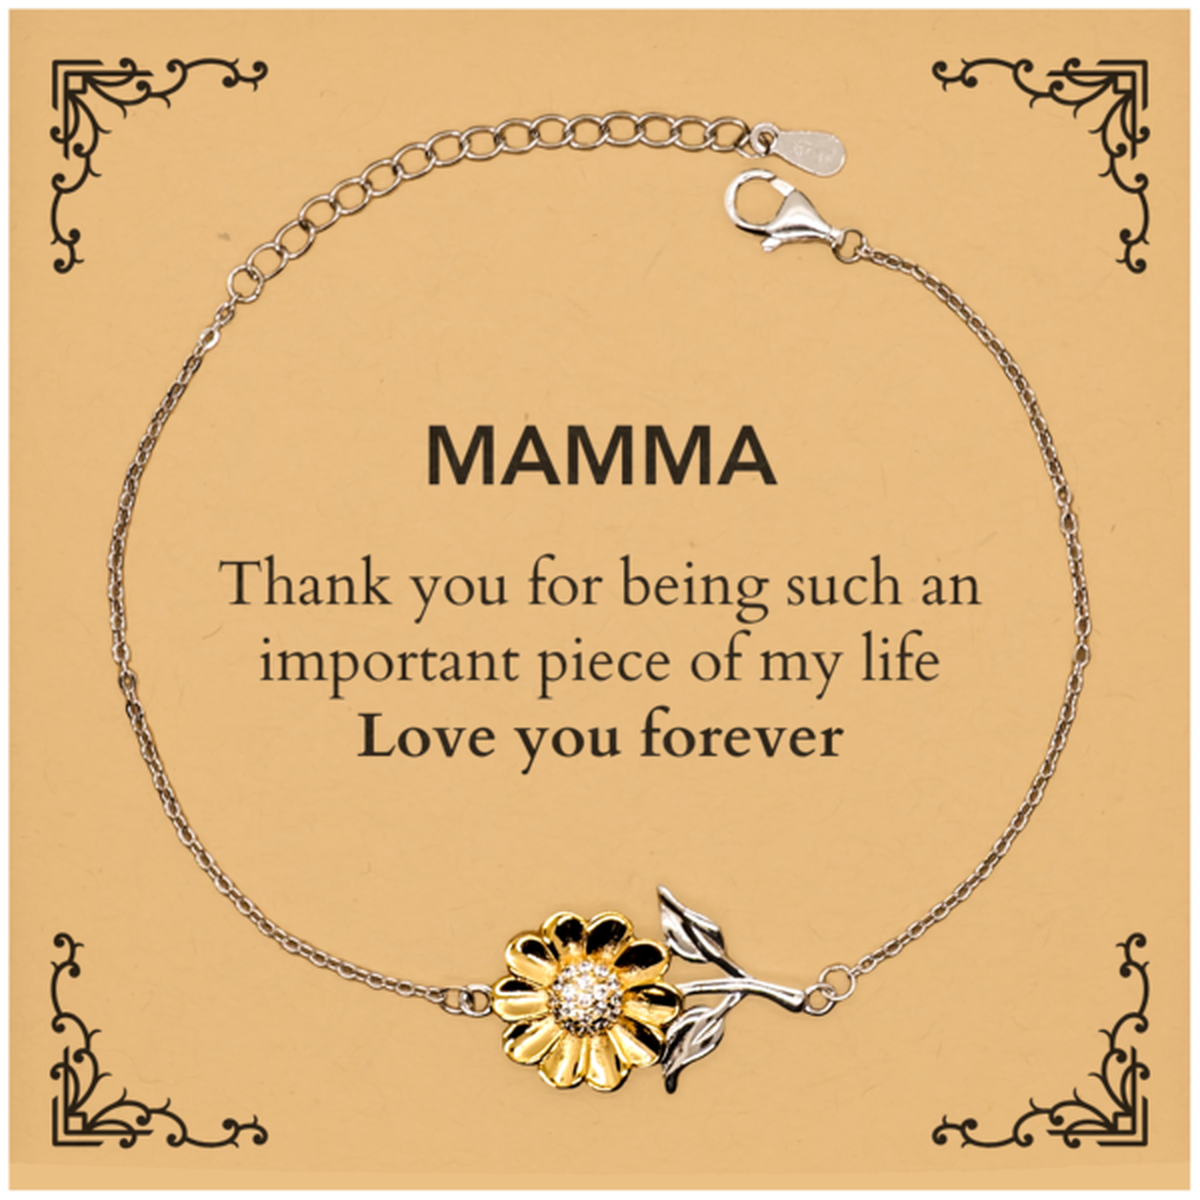 Appropriate Mamma Sunflower Bracelet Epic Birthday Gifts for Mamma Thank you for being such an important piece of my life Mamma Christmas Mothers Fathers Day